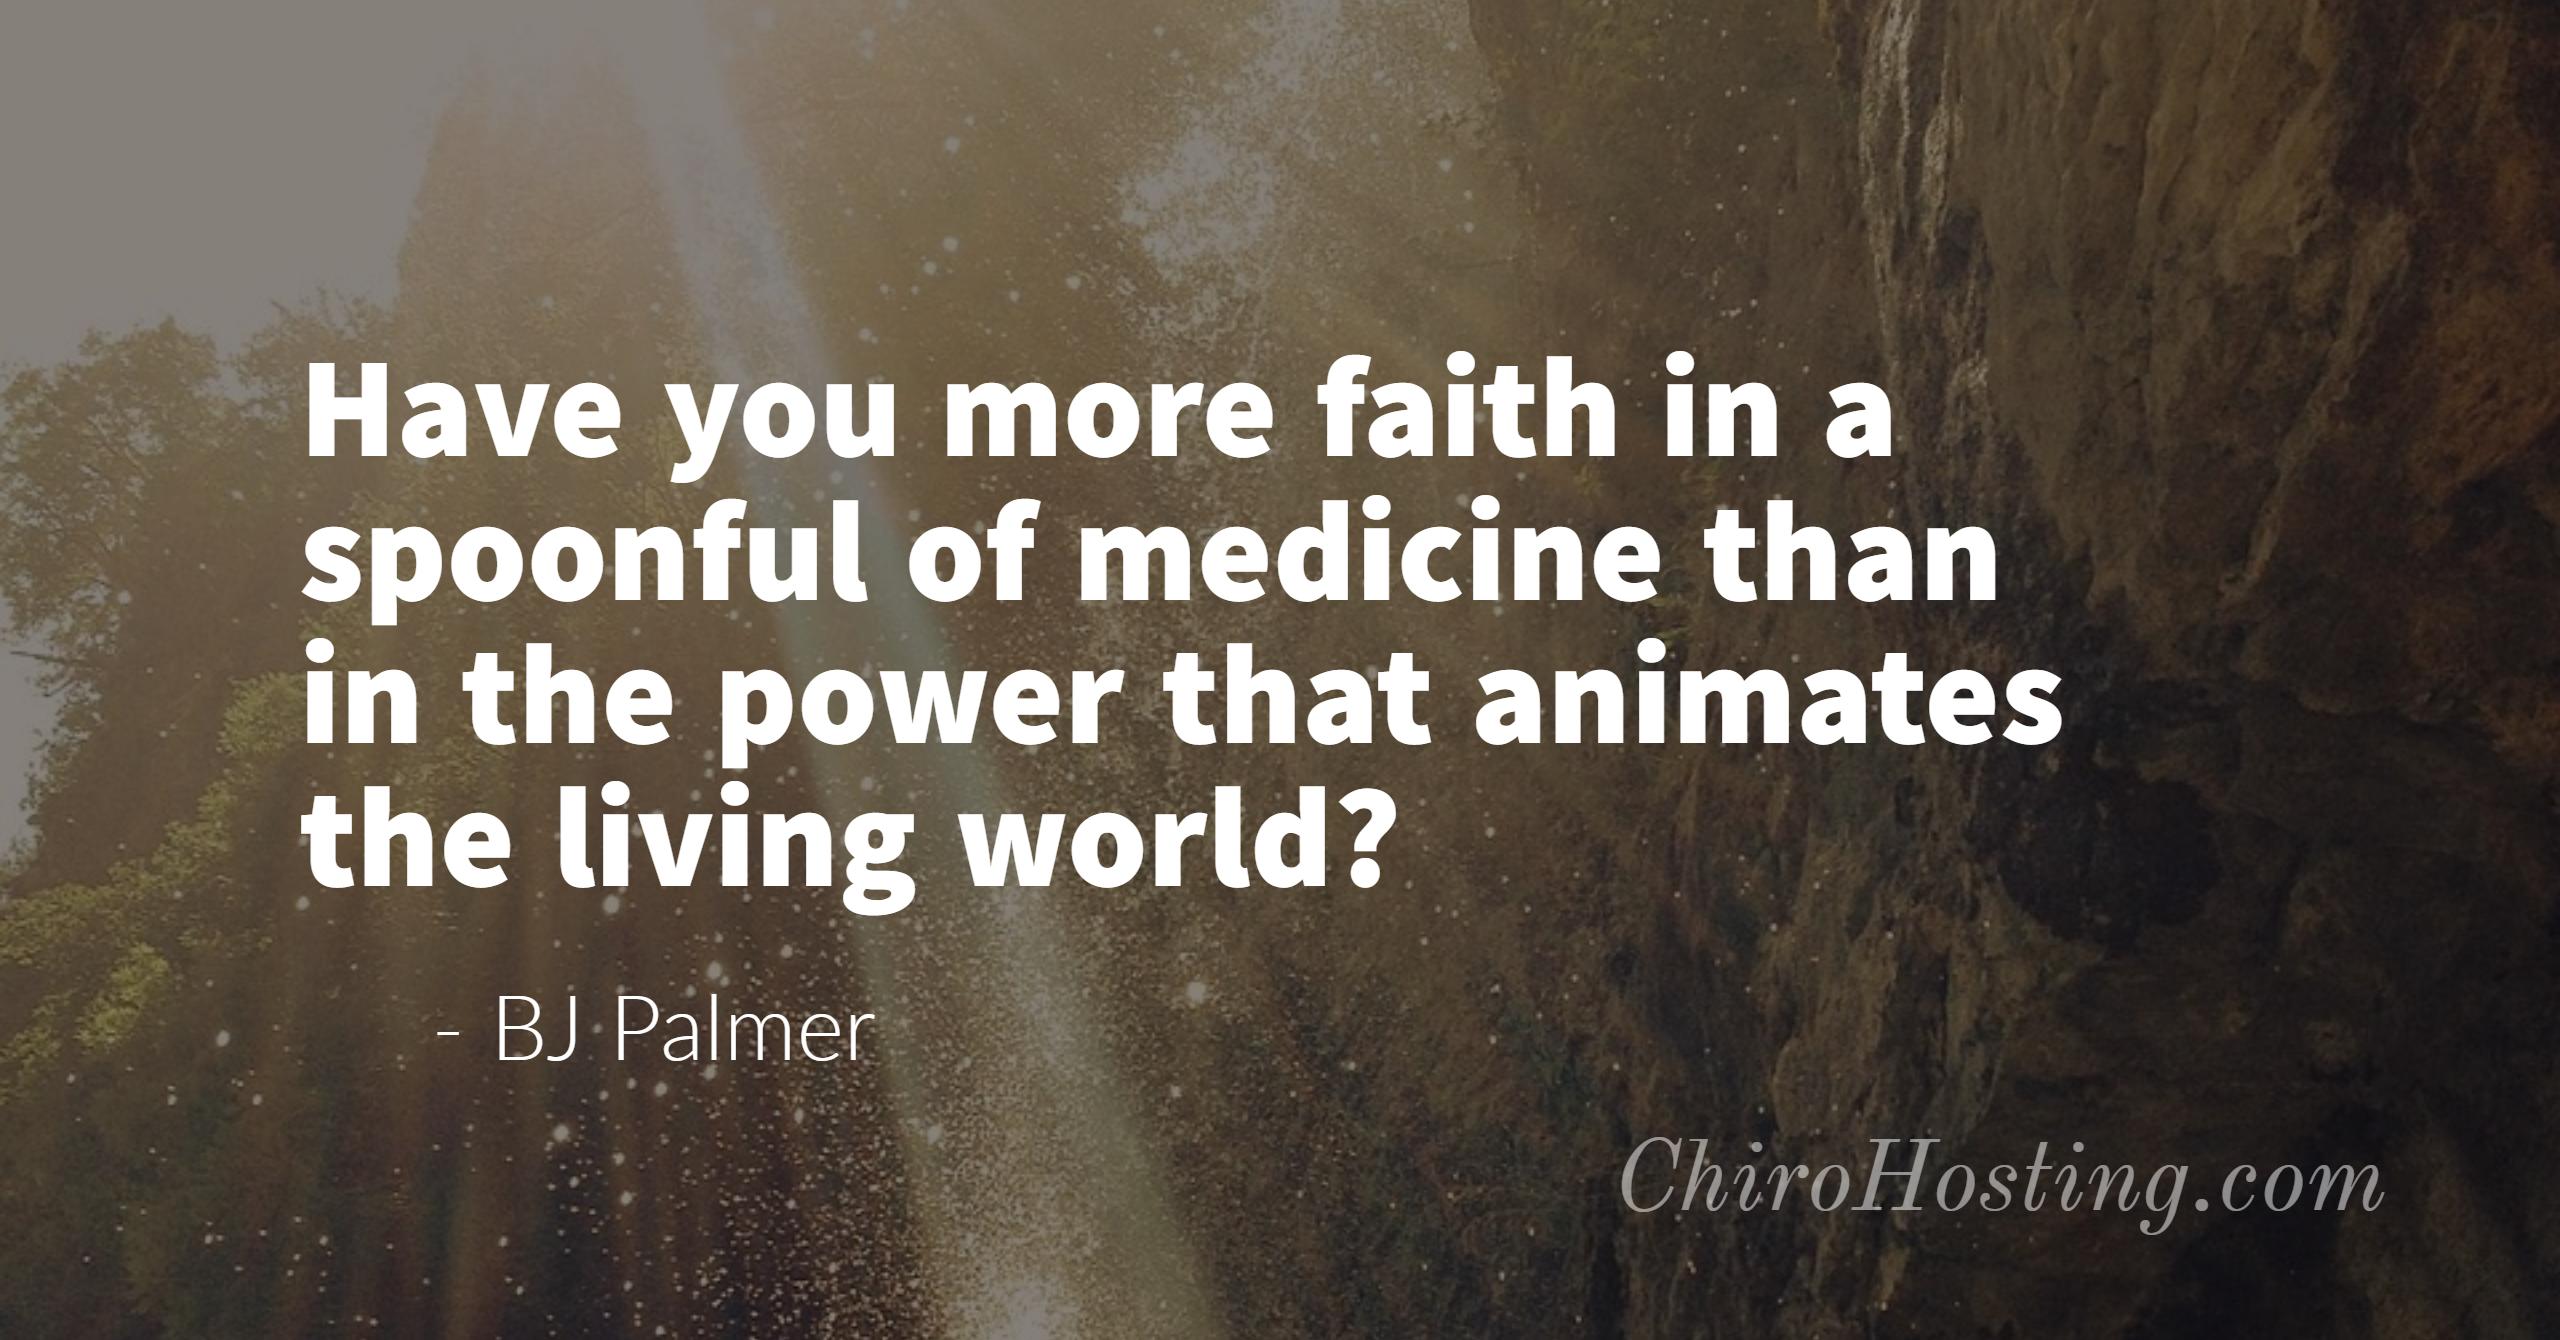 Have You More Faith in a Spoonful of Medicine Than in the Power That Animates the Living World?